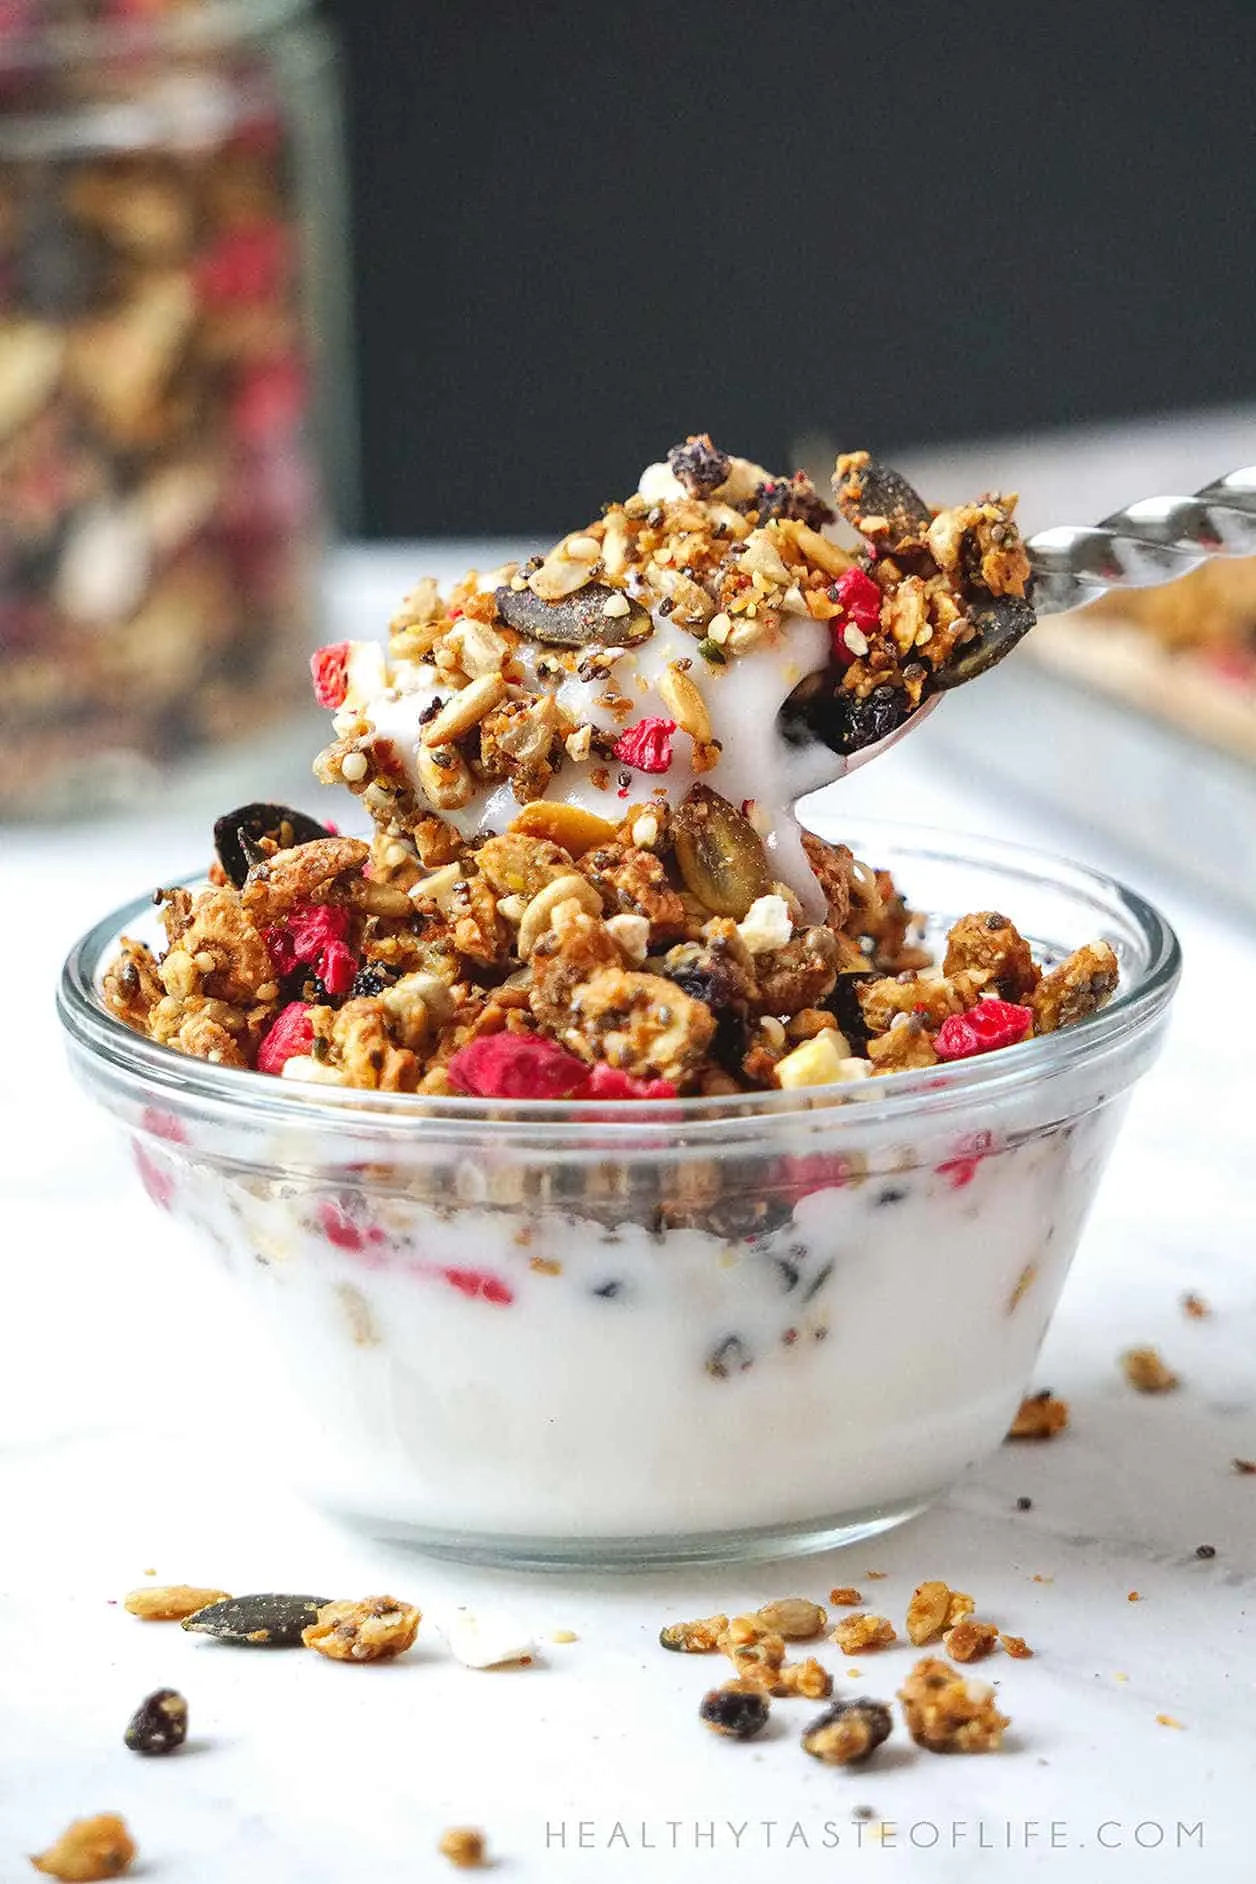 Healthy Keto Granola Recipe - great for Low Carb, Paleo, Whole 30, Dairy Free, Gluten Free and Vegan diets.